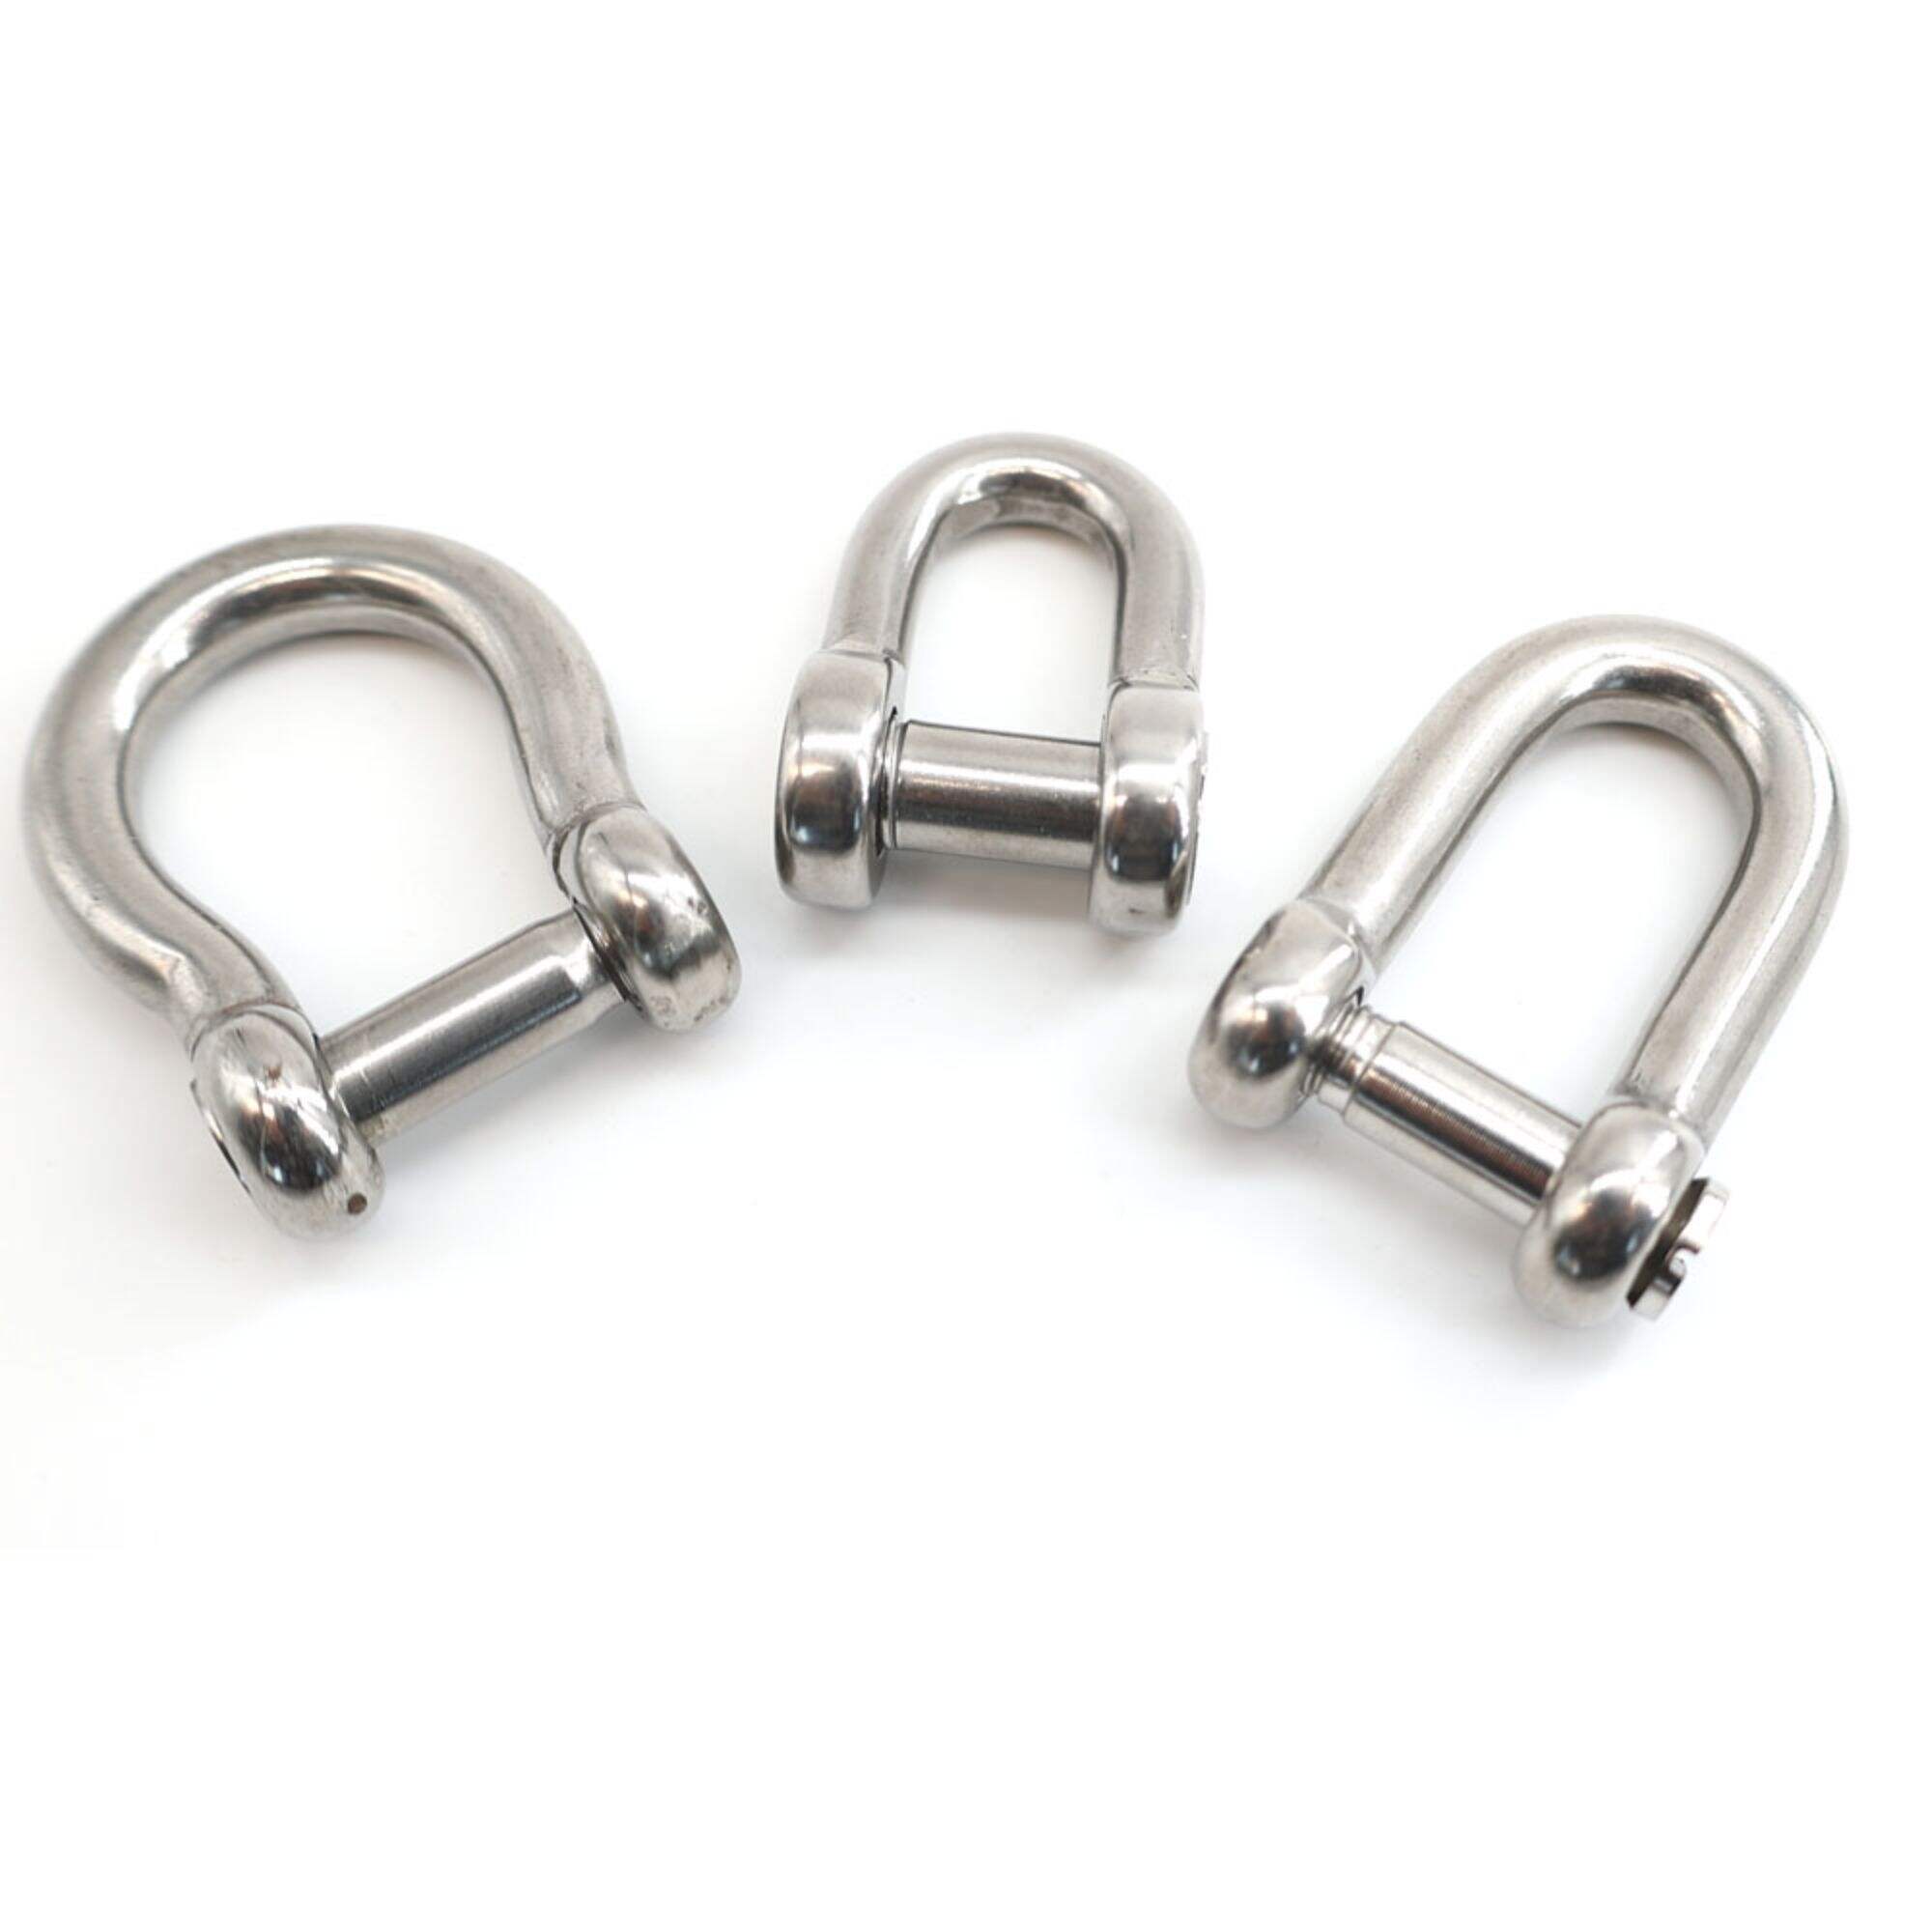 G210 G2150 Metric Hot Dip Galvanized Drop Forged Dee Shackle For Lifting Marine